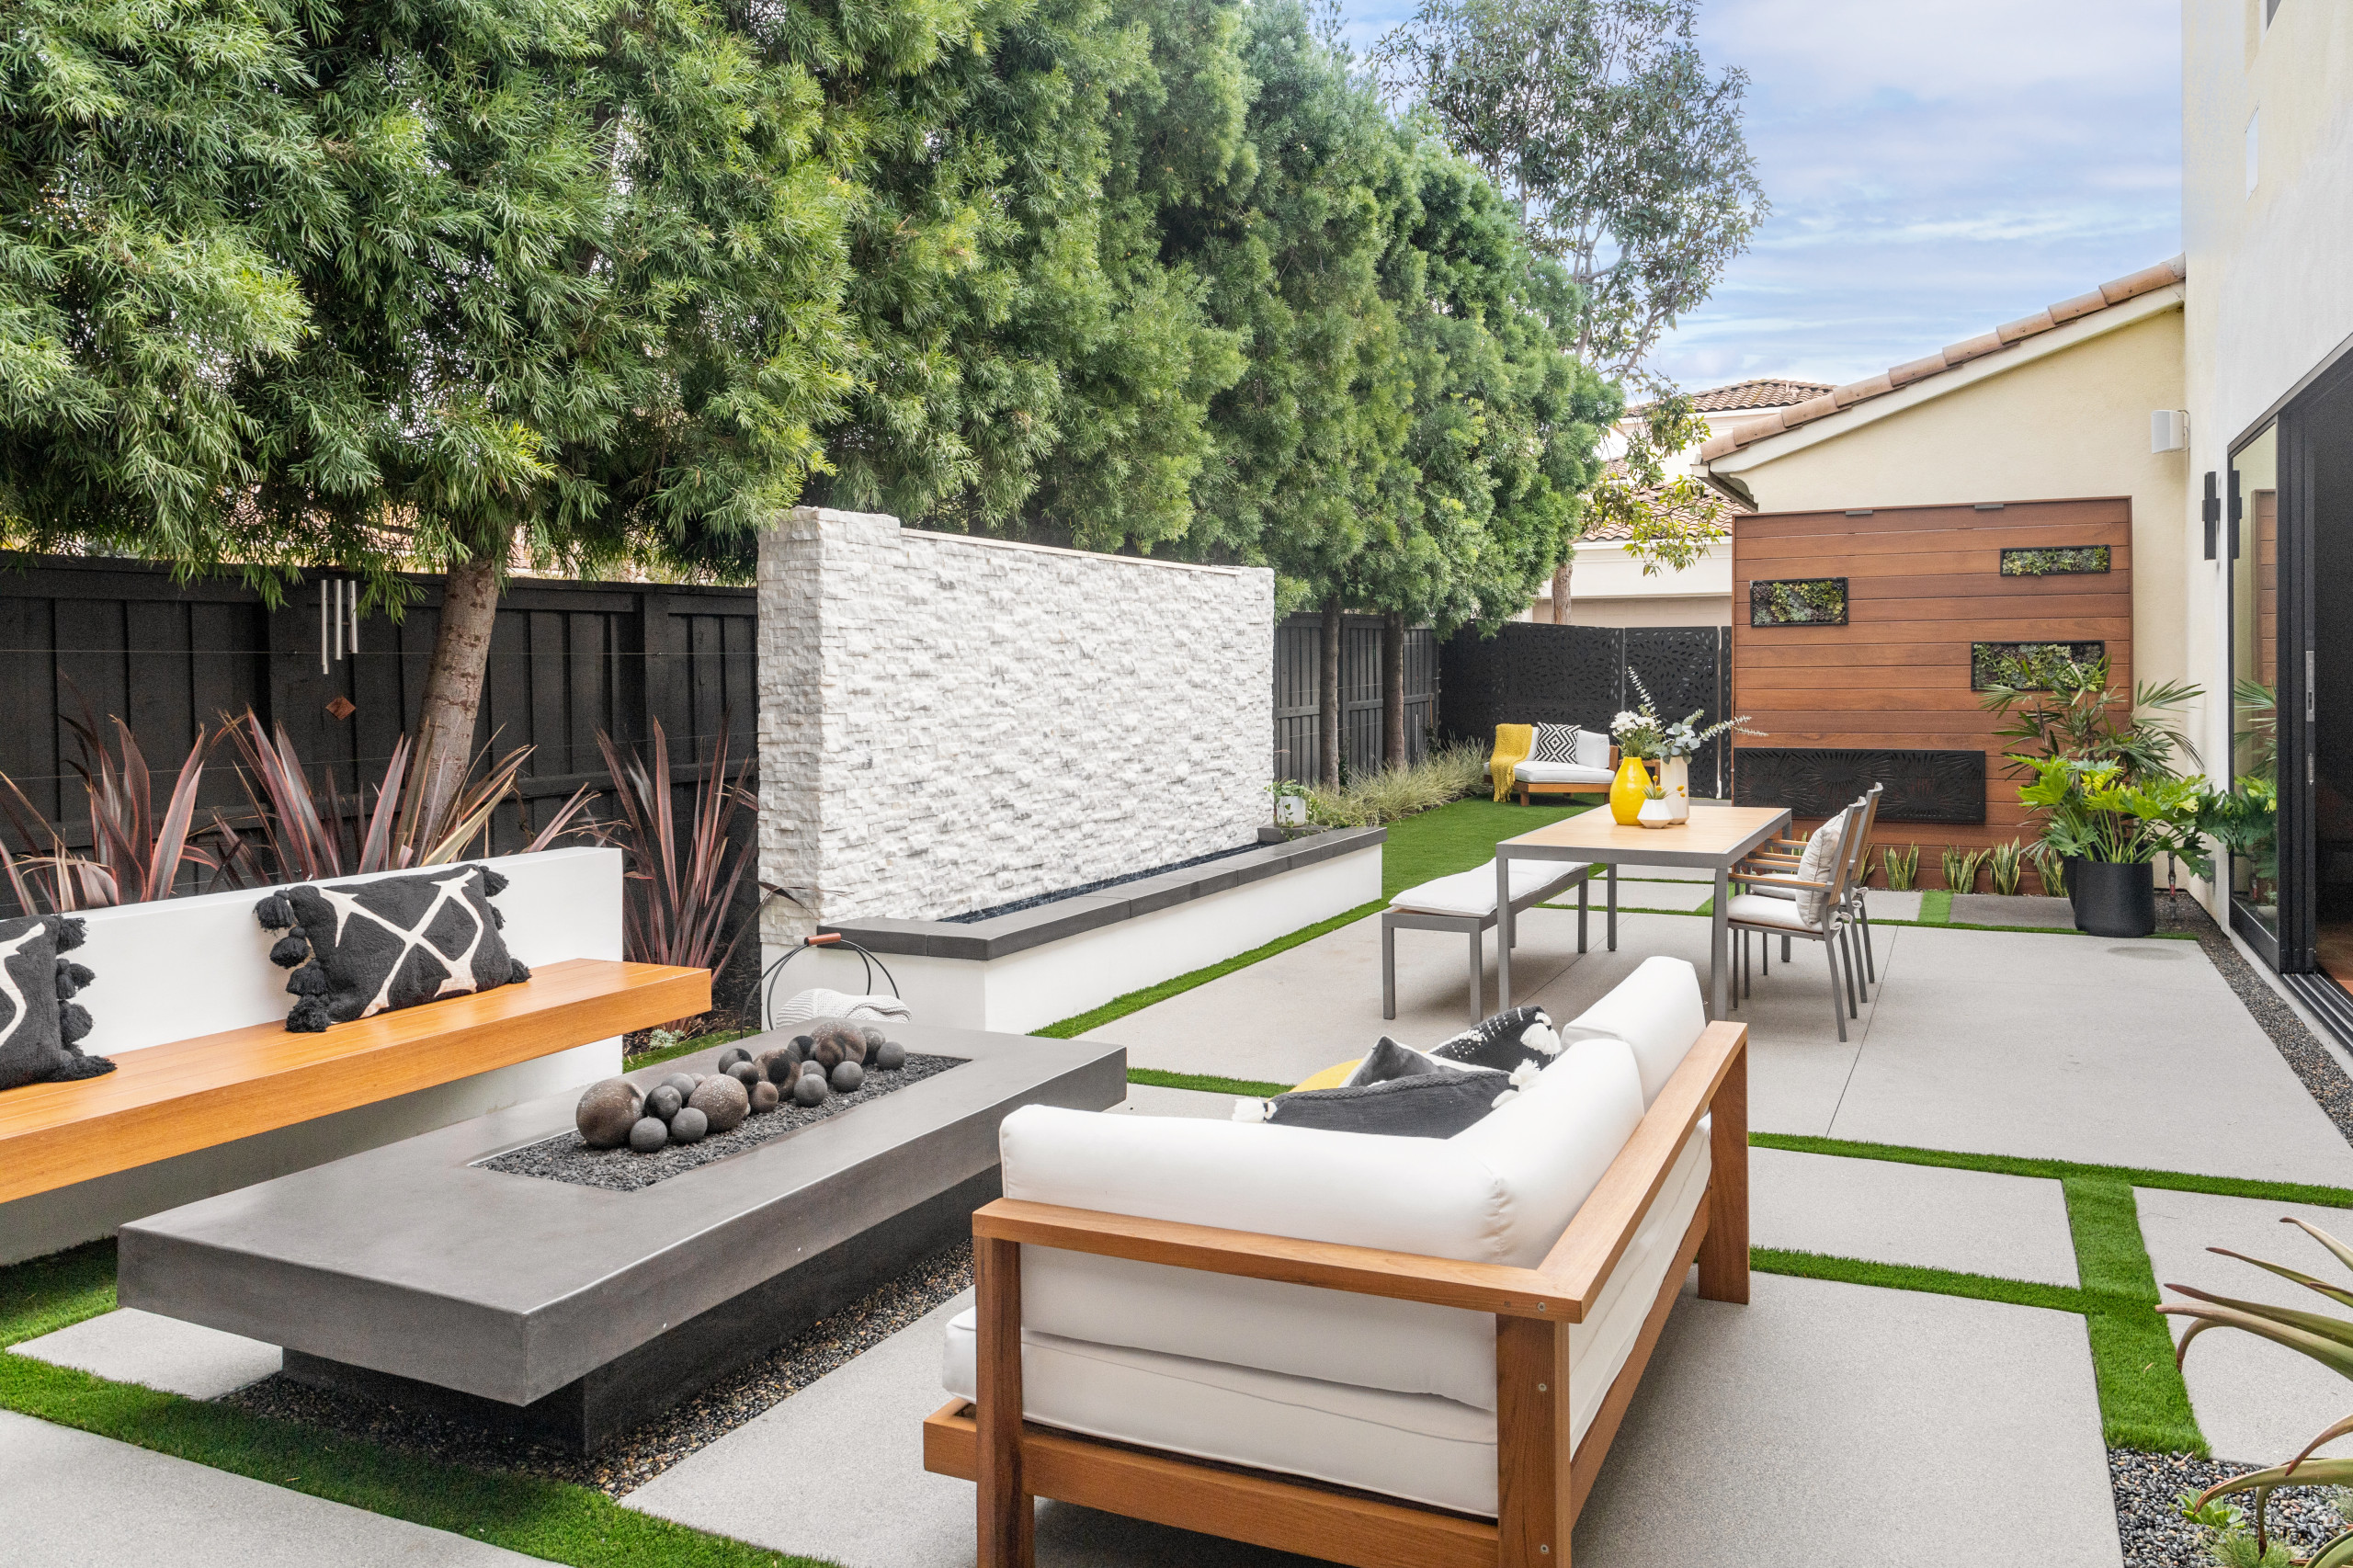 Transforming Your Backyard: Remodeling Ideas for Chula Vista, CA